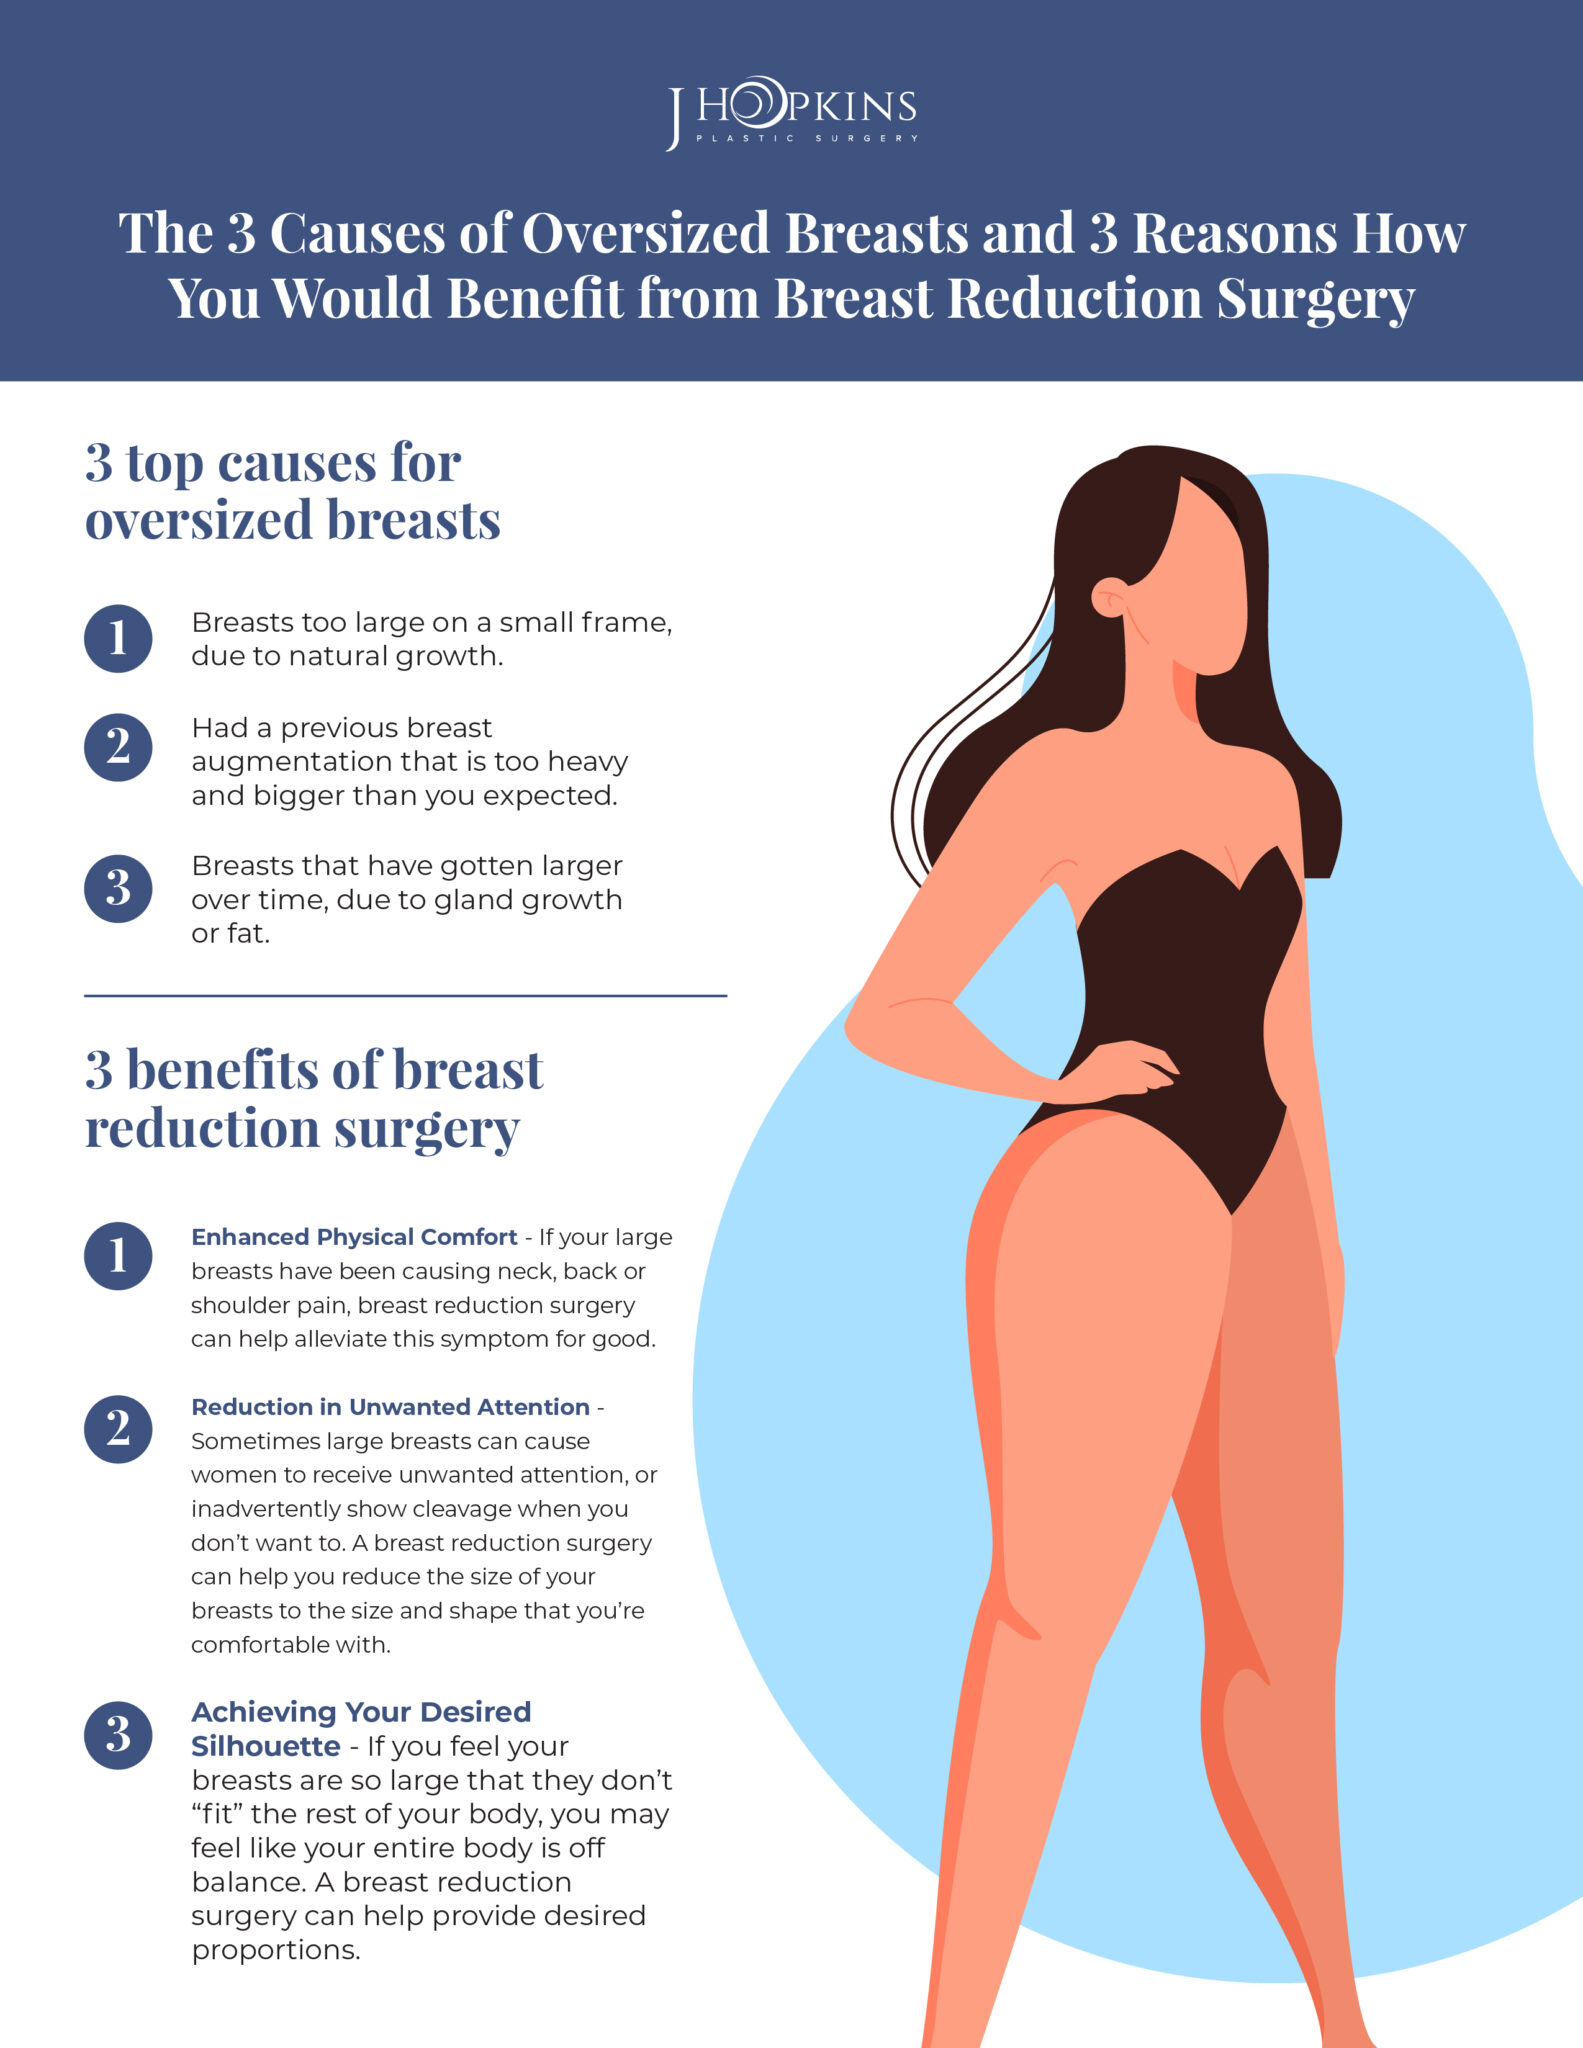 What to expect after your breast reduction surgery